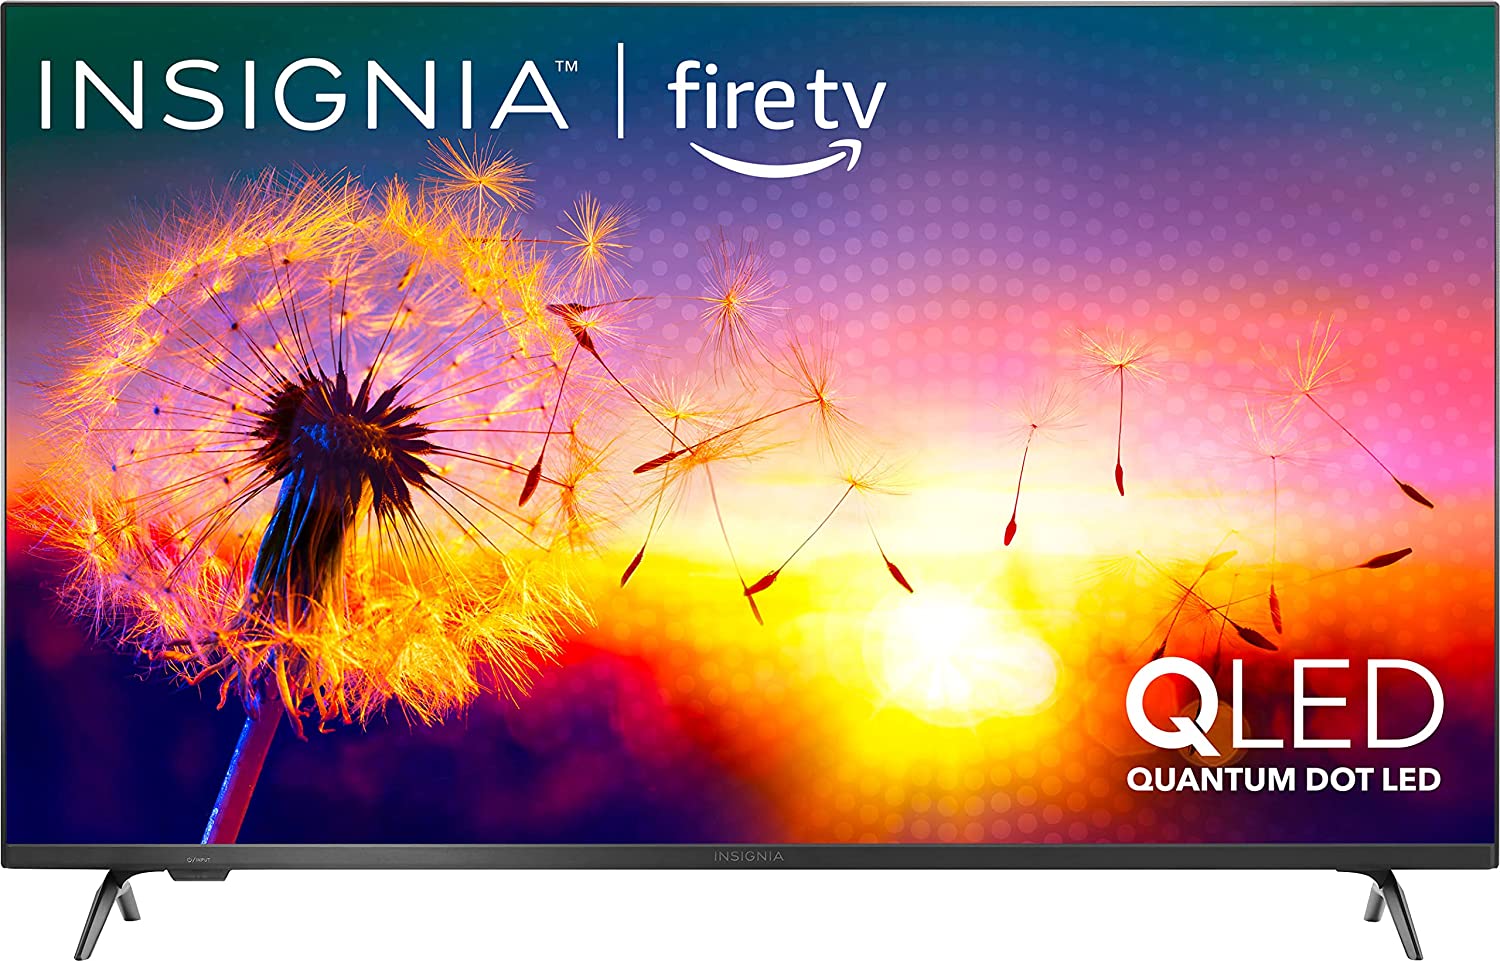 Image of the Insignia Fire TV.